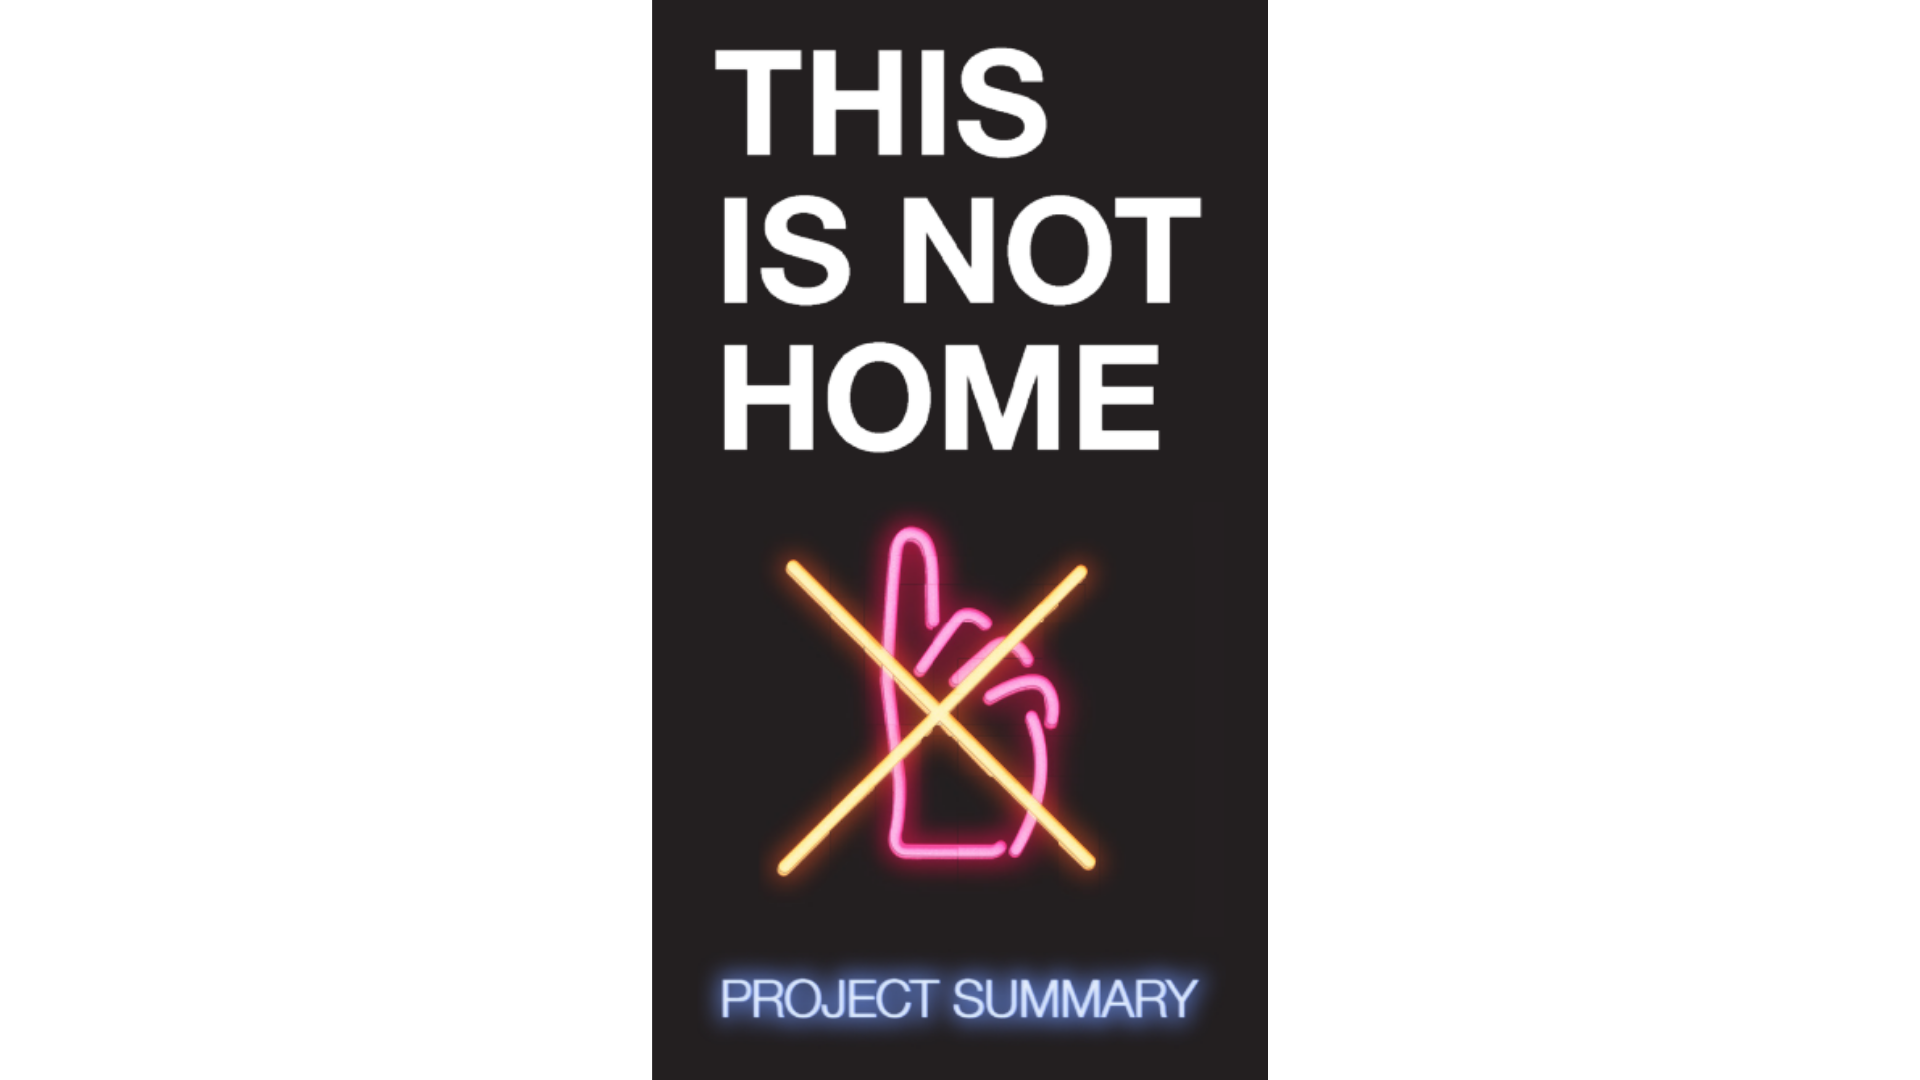 A black background with white text that reads "This is Not Home". Below is an image of a hand with the index finger pointing up, and an X through the image.